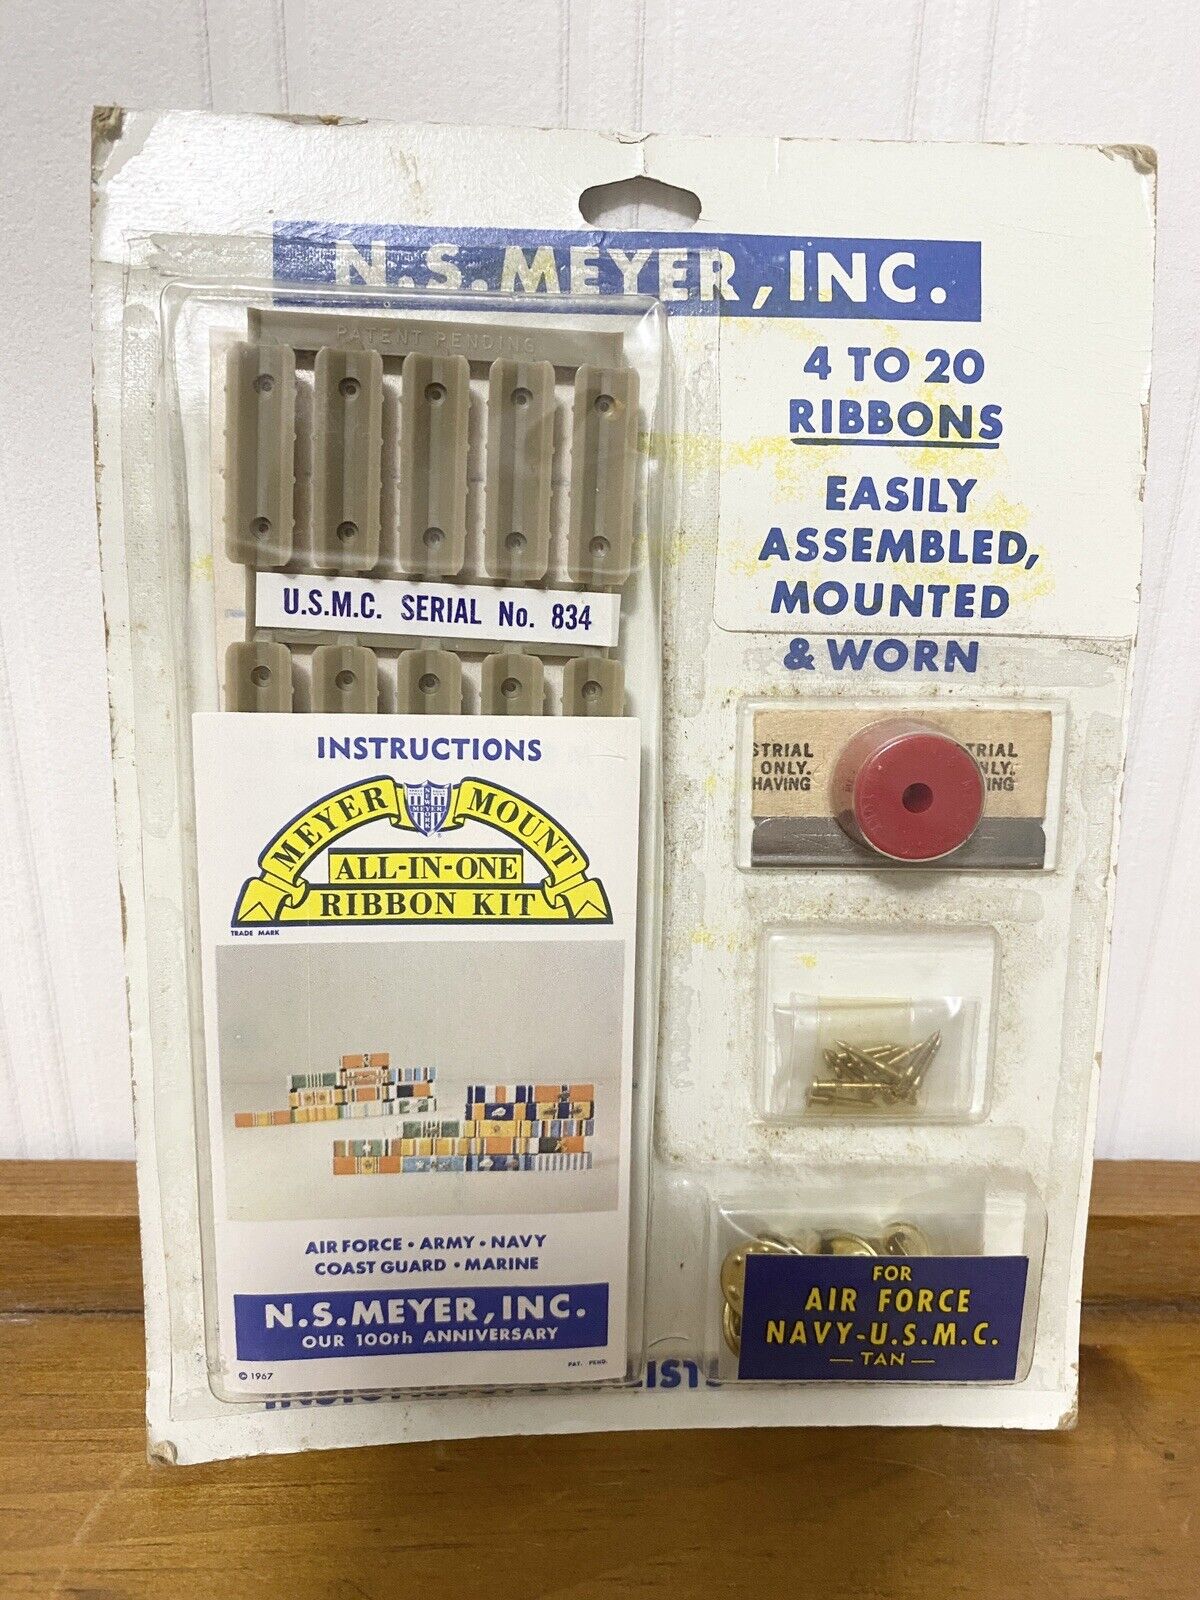 All In One Meyer Mount Ribbon Kit Your 4 To 20 Ribbons Assembled MOUNTED & WORN